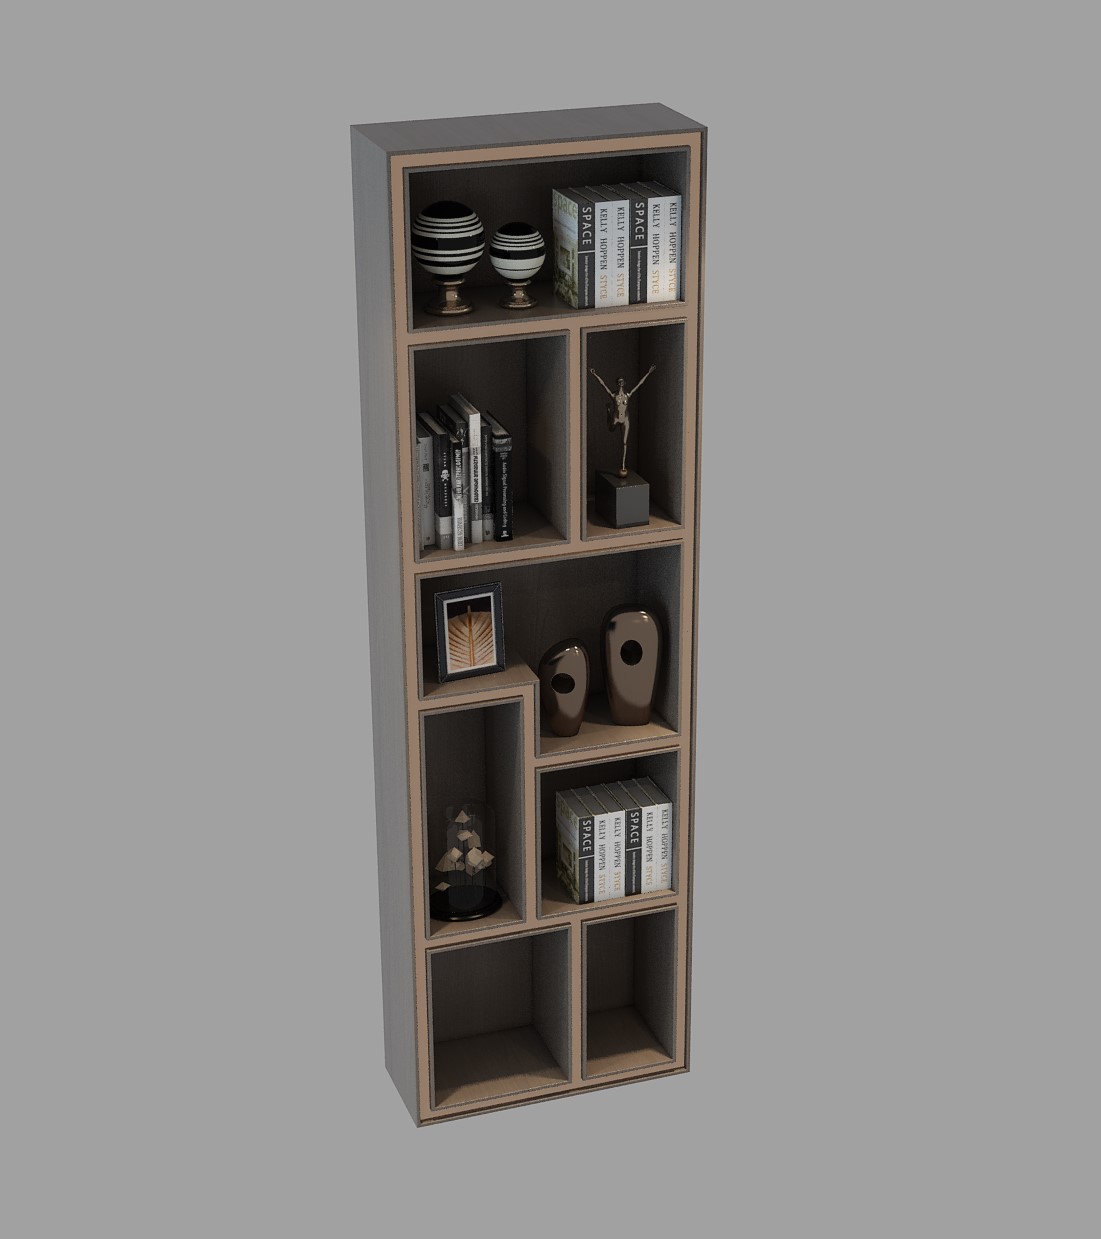 10226. Download Free Bookshelf Model by Huy Hieu Lee